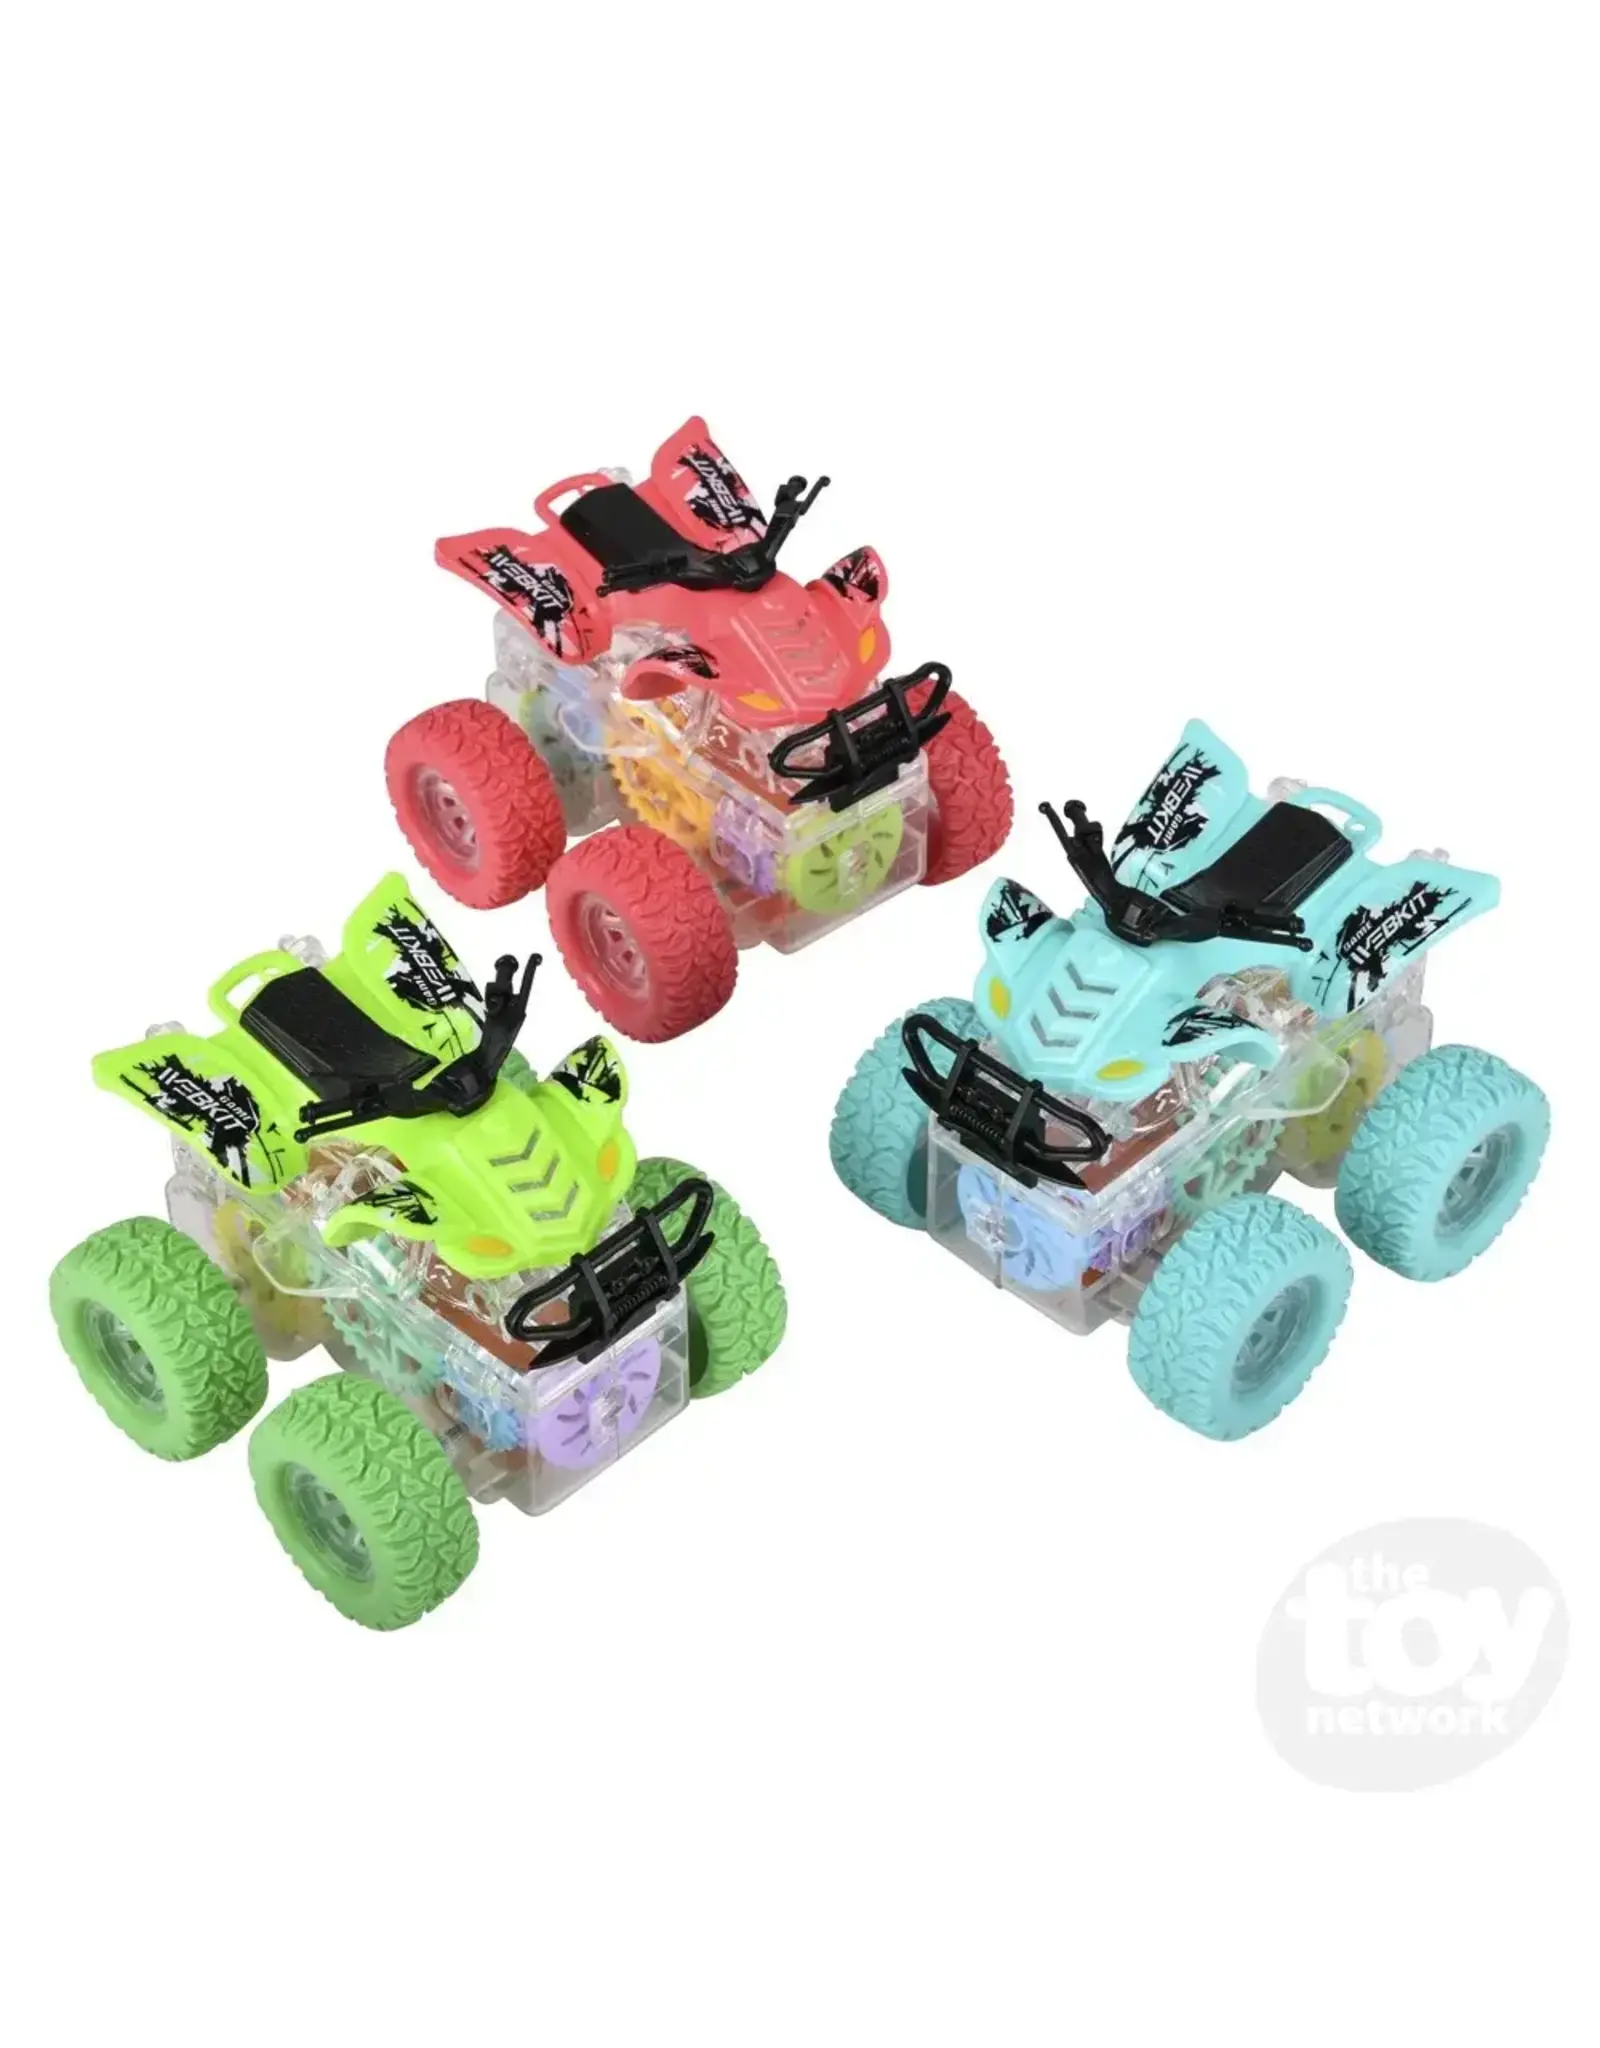 The Toy Network Friction Gear Light-up ATV